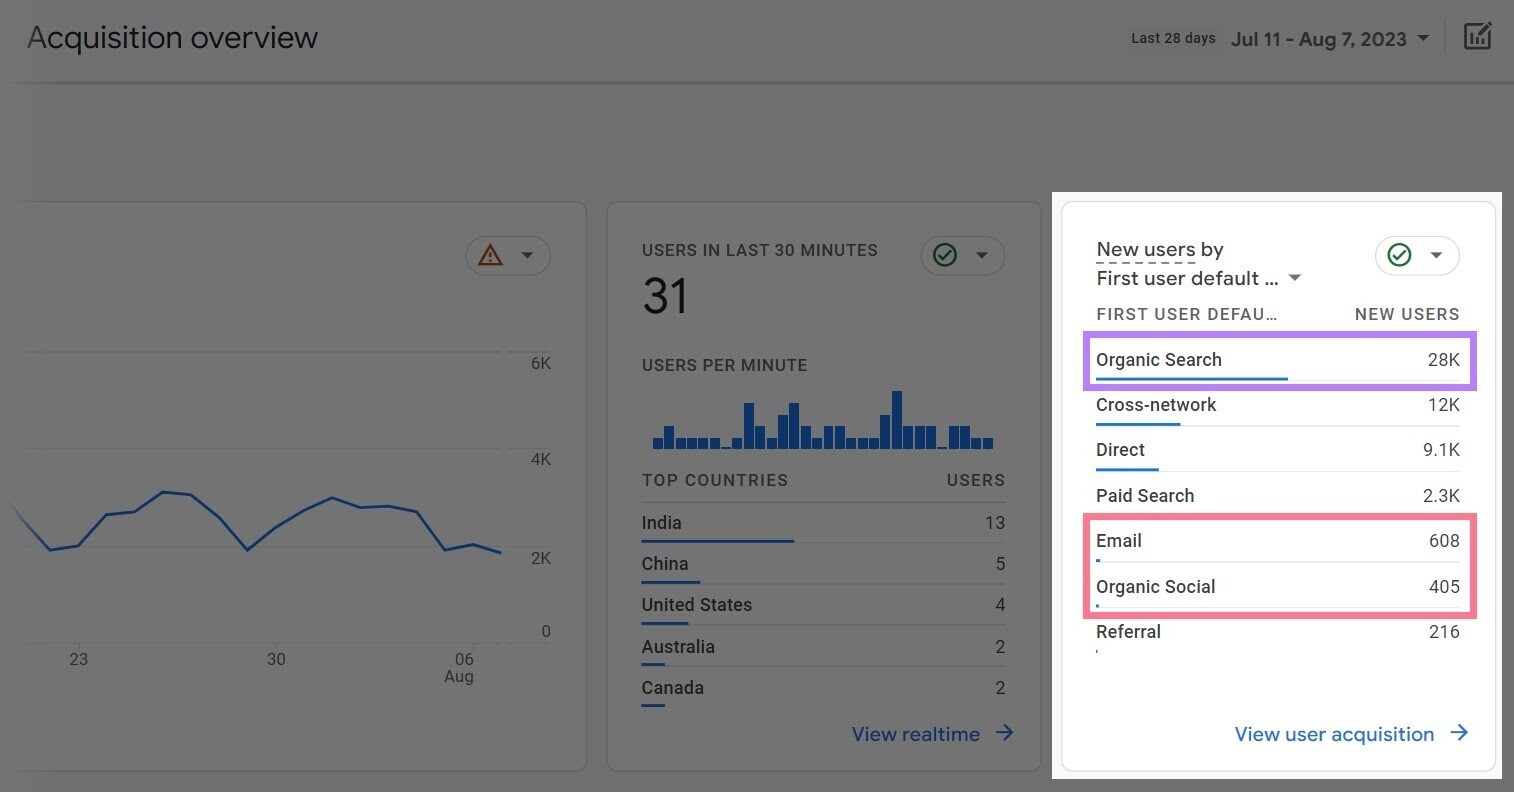 in “Acquisition overview” report you can see which sources contribute the most traffic to your site